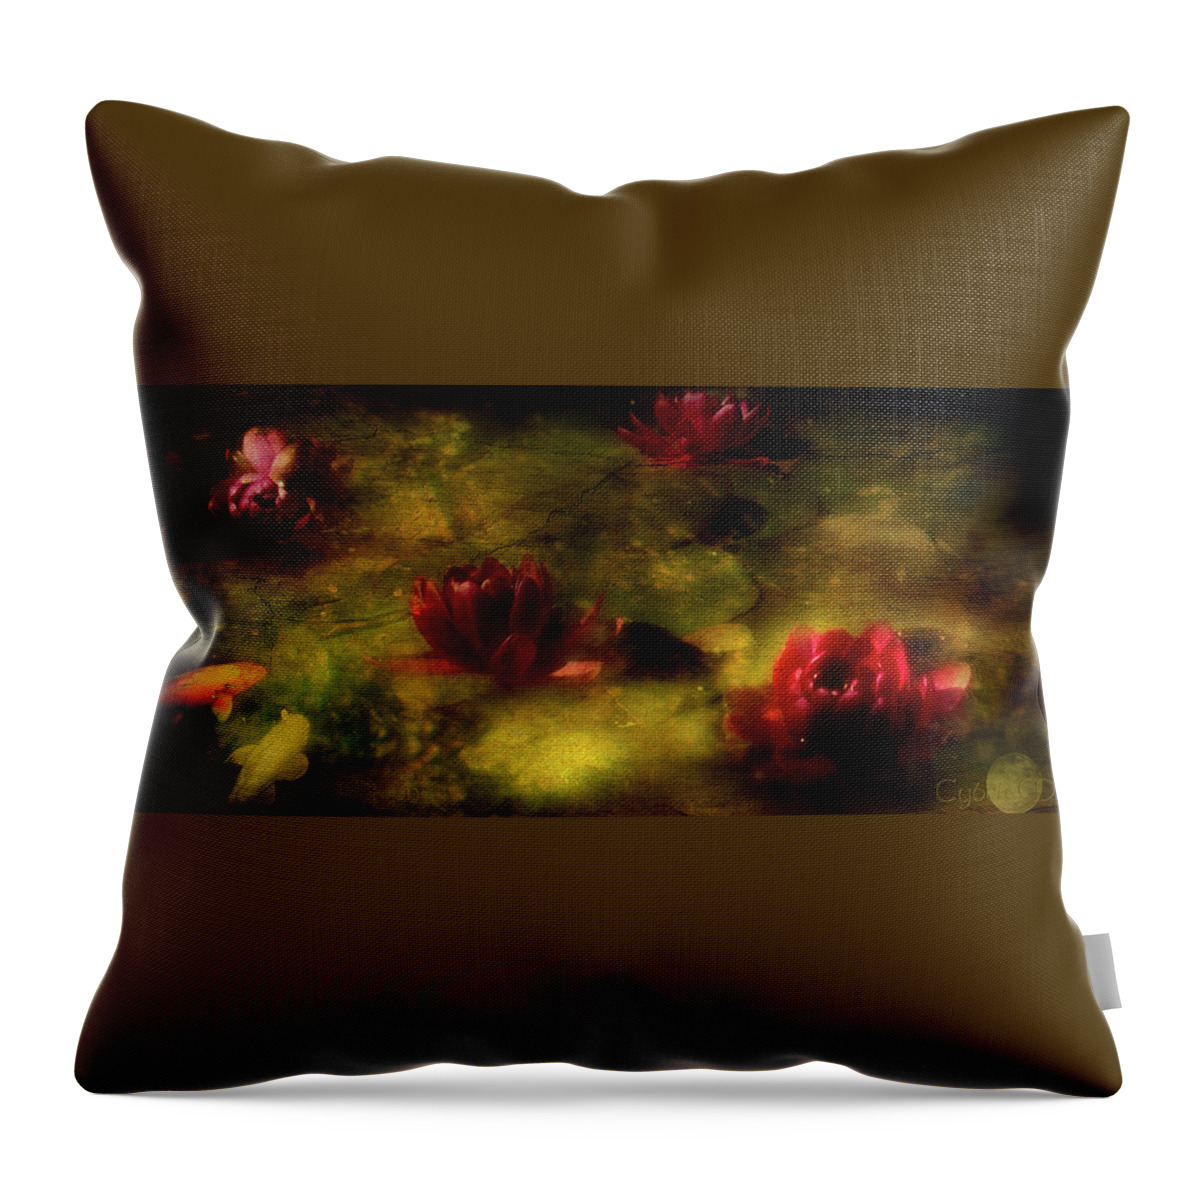  Throw Pillow featuring the photograph The Lily Pond by Cybele Moon